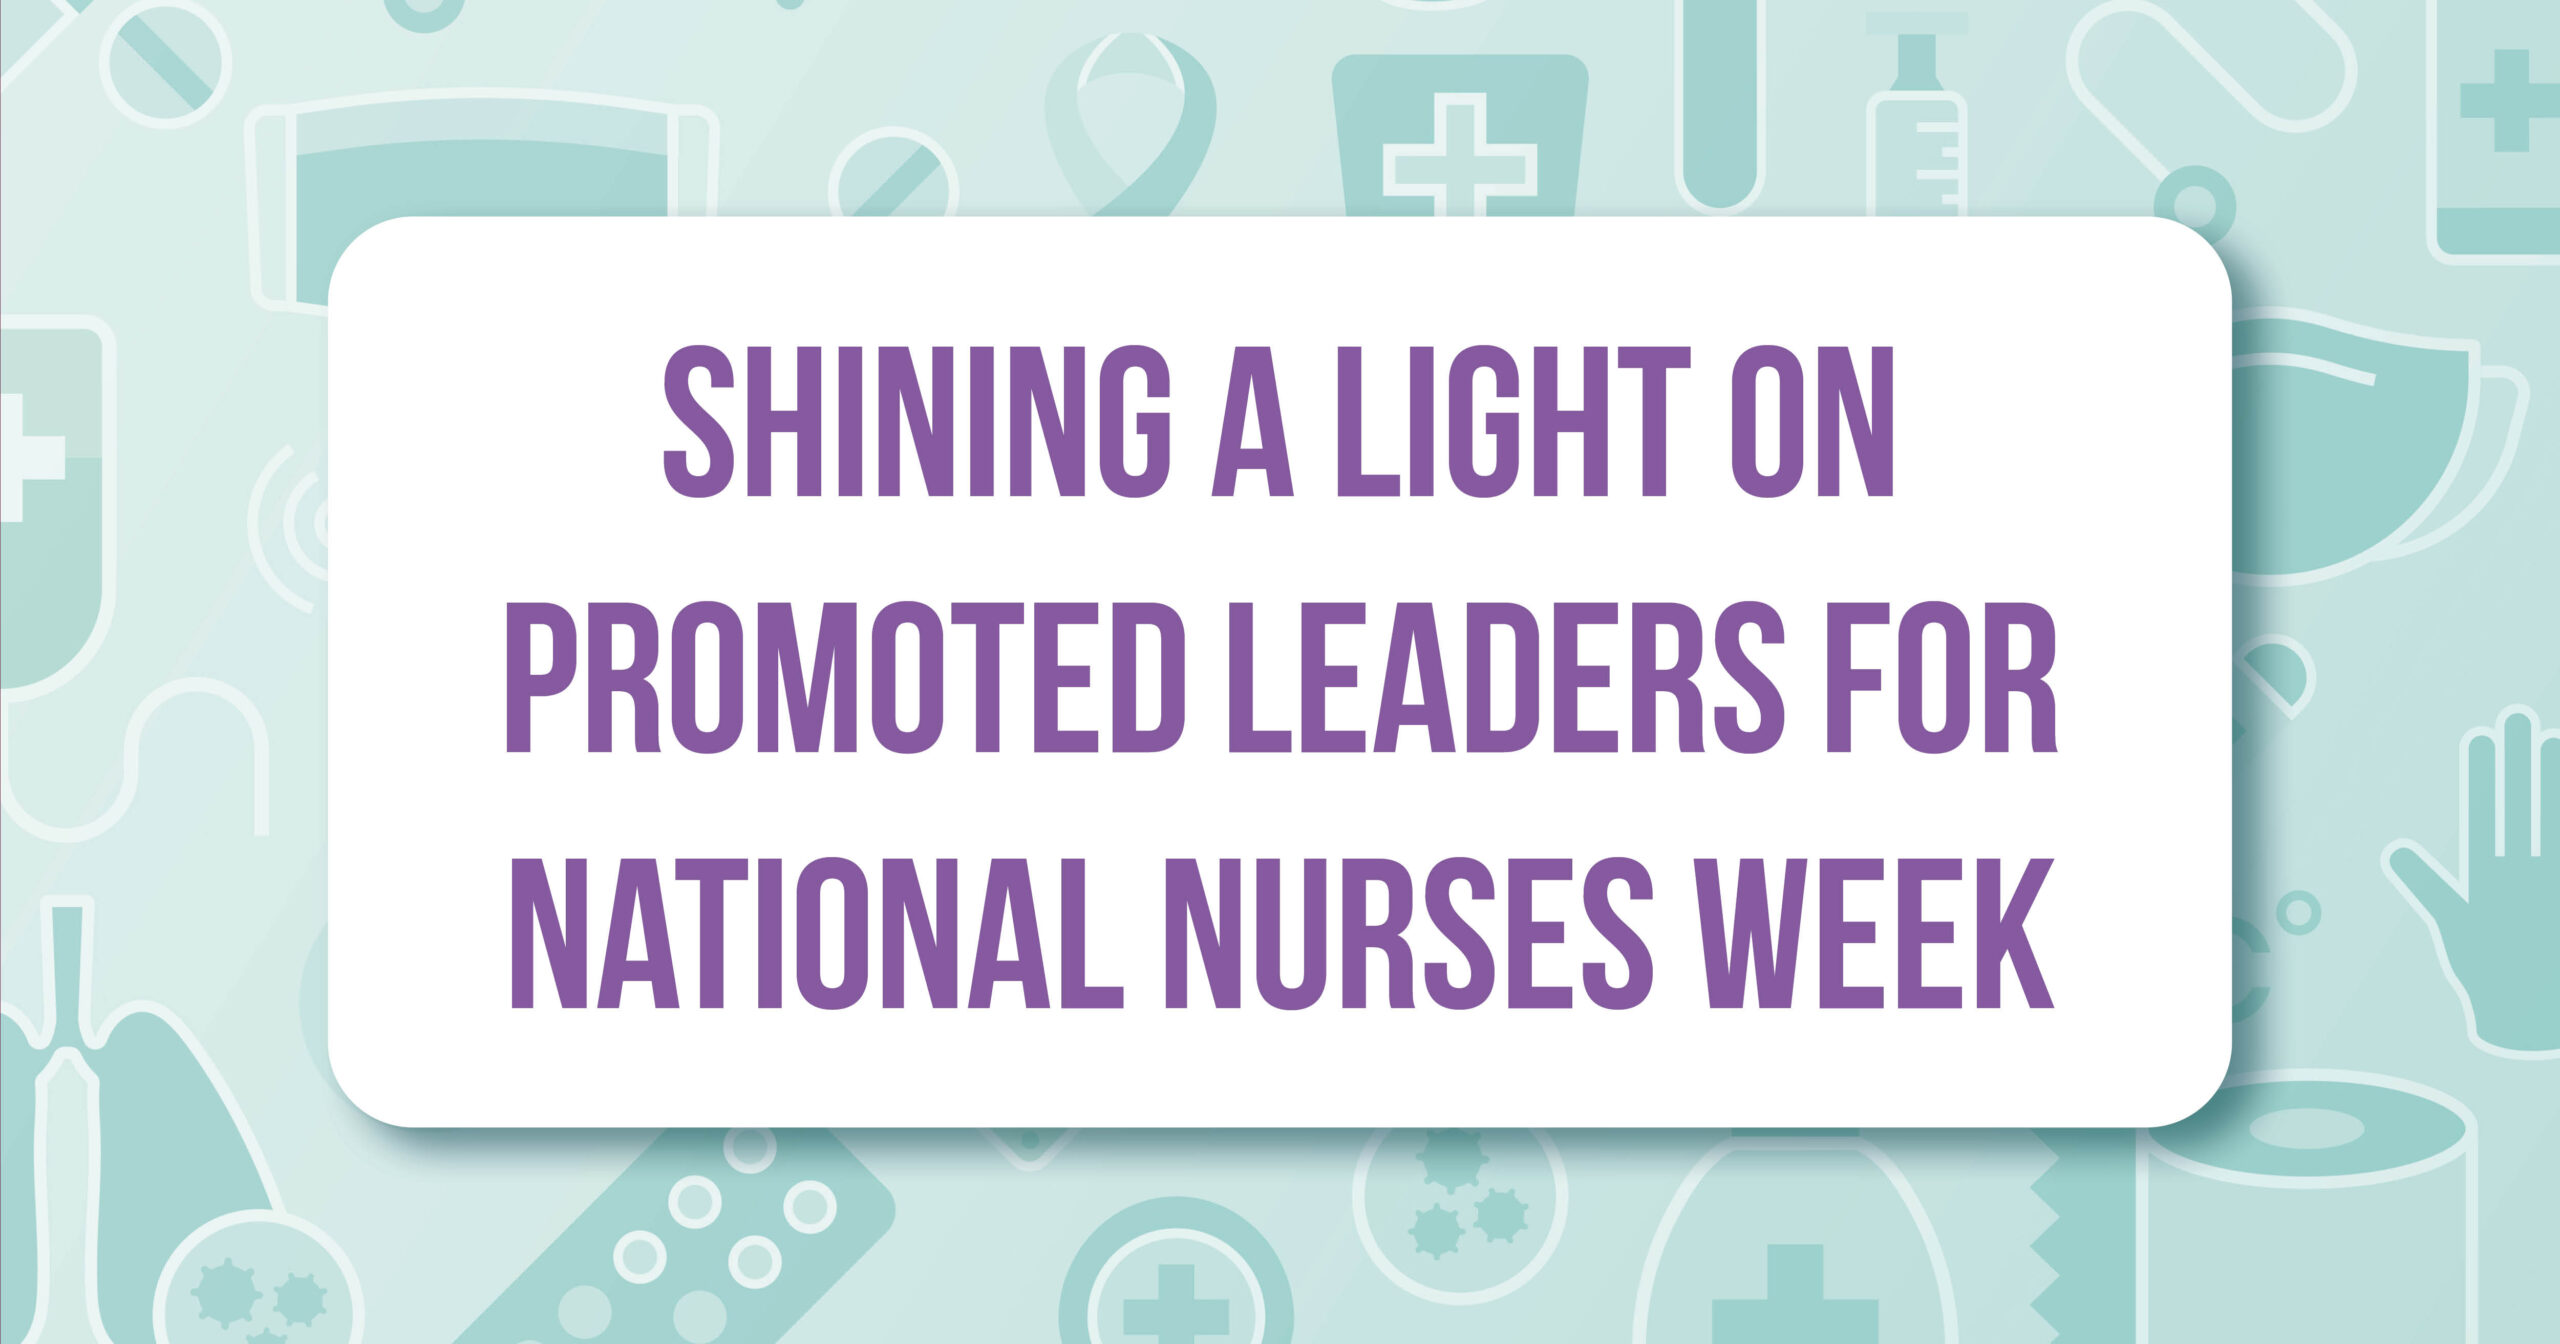 Shining a Light on Promoted Leaders for National Nurses Week